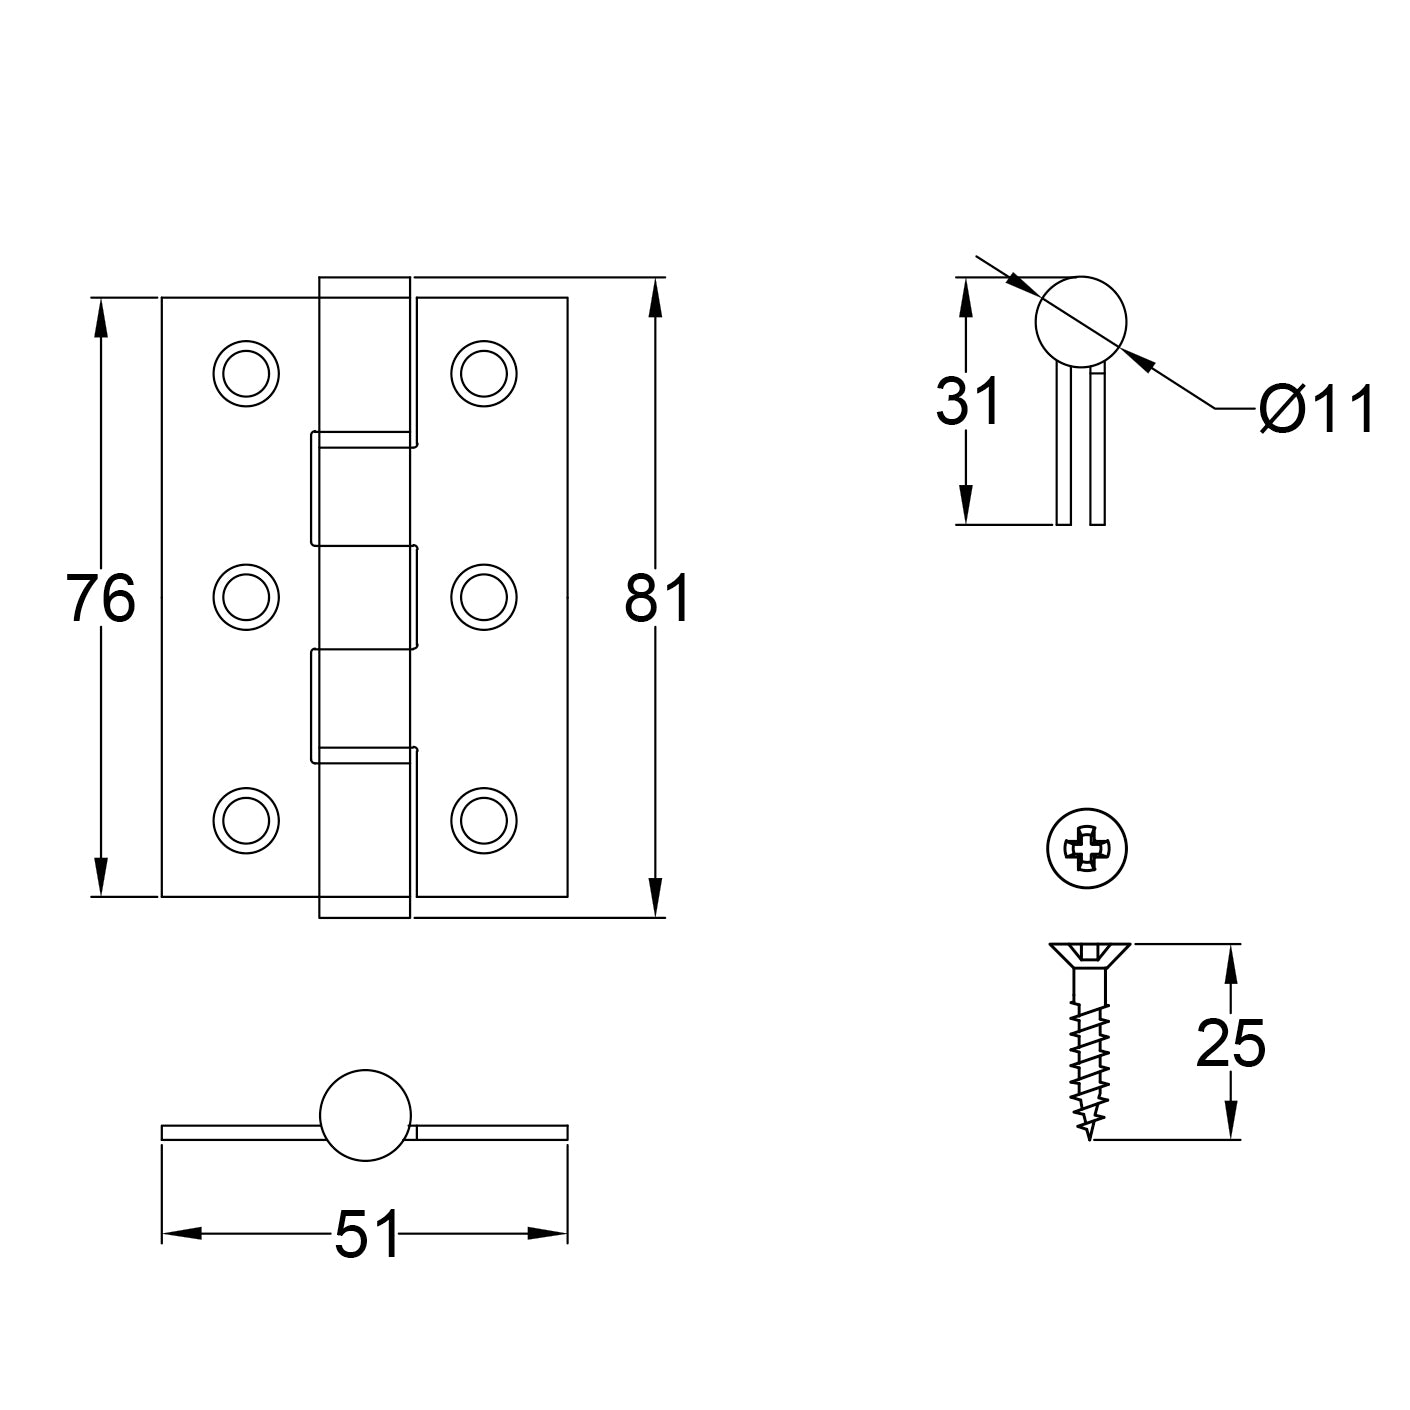 Drawing of washered butt hinge 3 inch, stainless steel door hinge SHOW